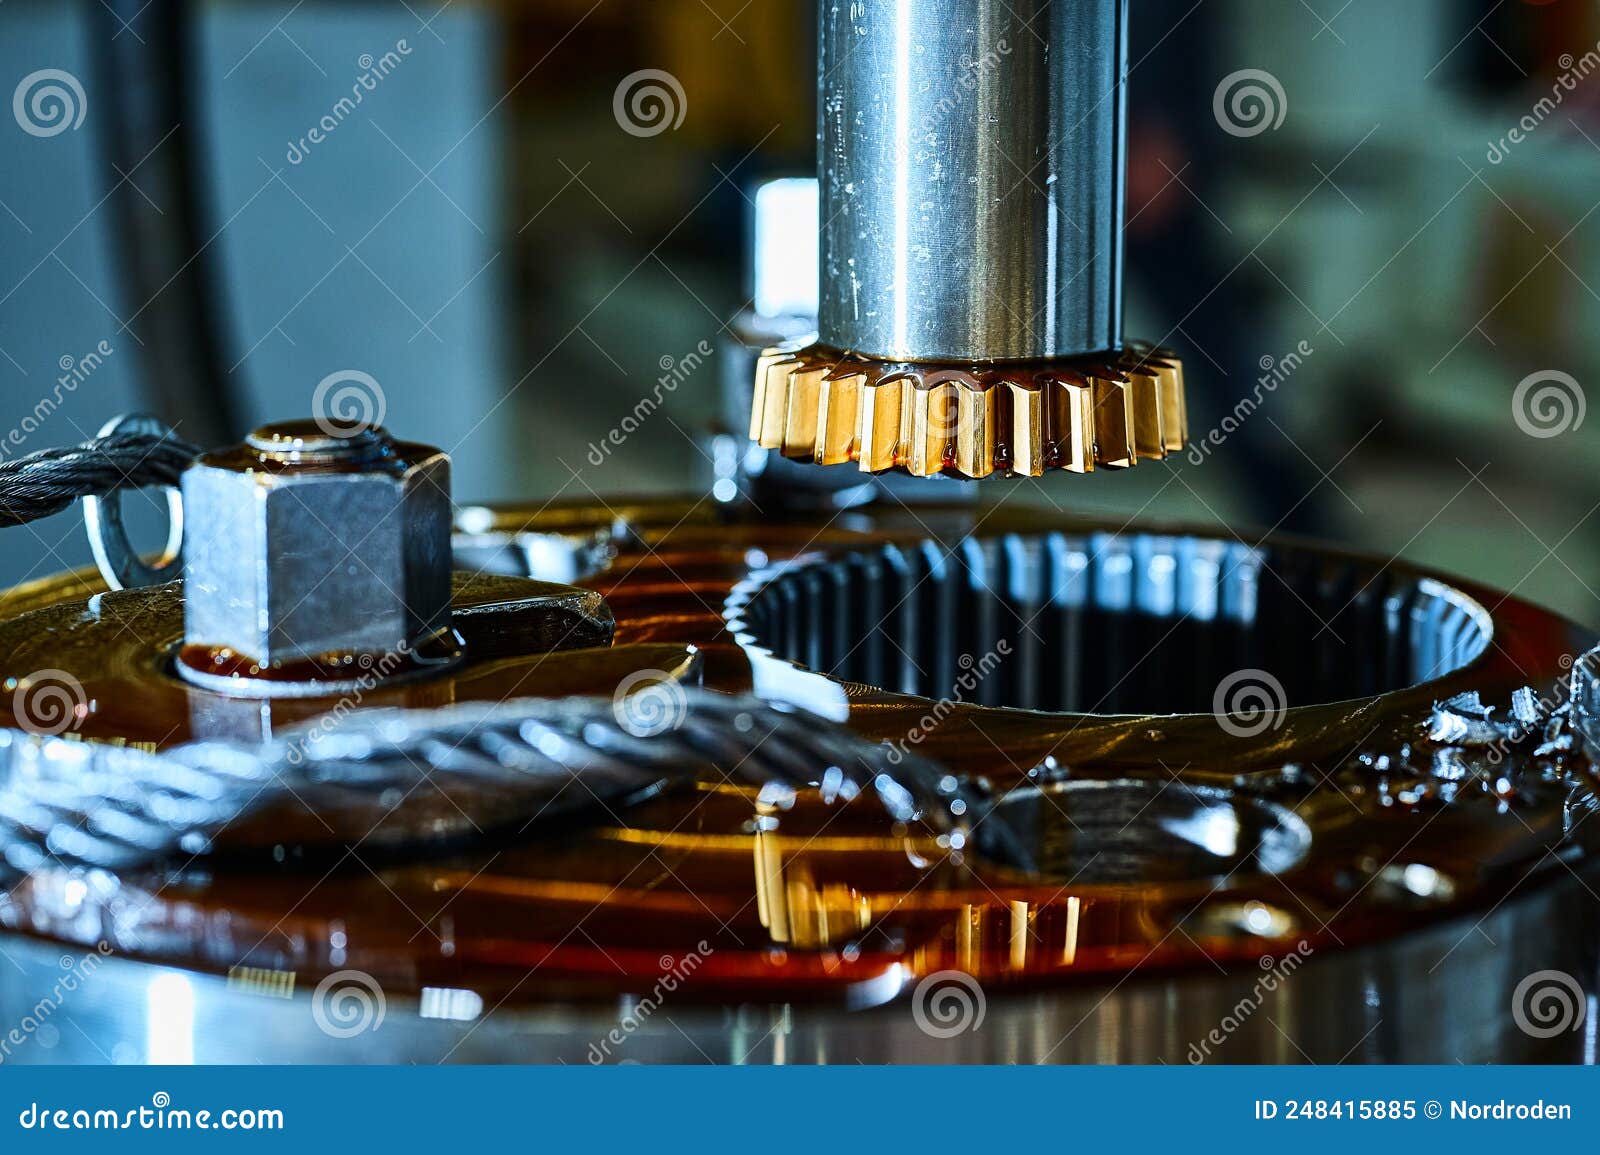 Gear cutting on a Shaper (making the tool) 